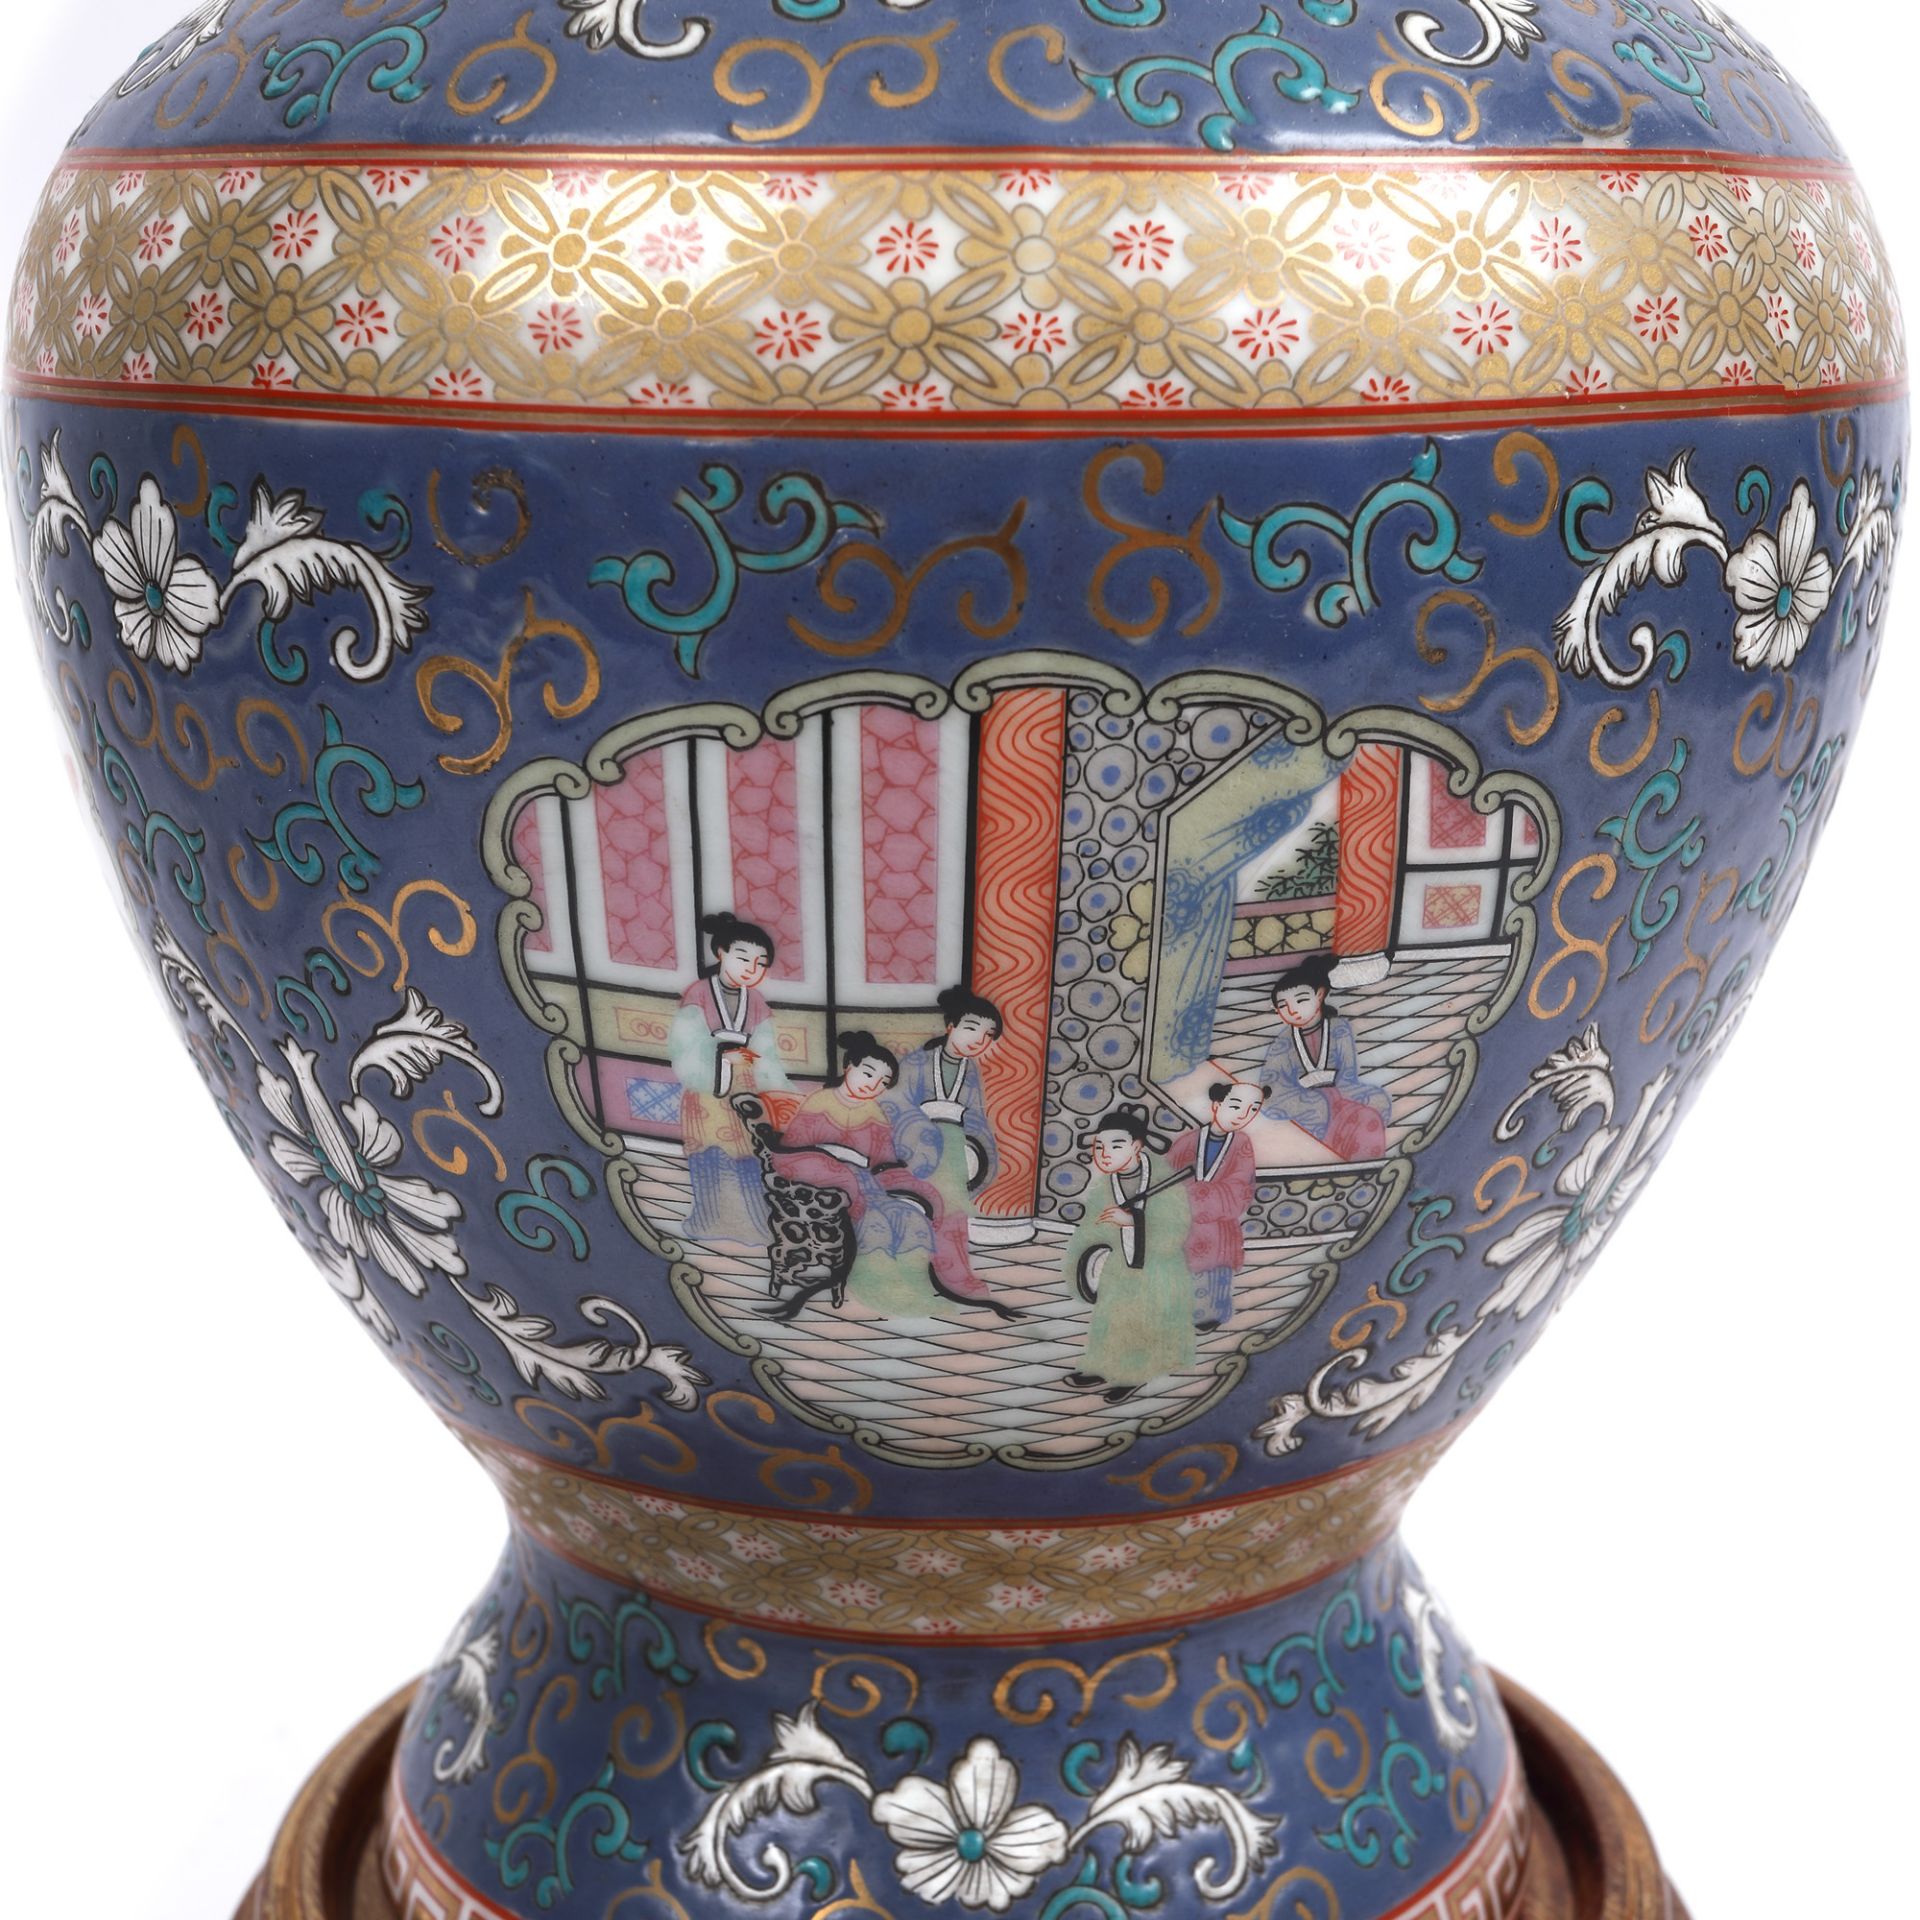 Porcelain and glass lamp, with chinoiserie decoration - Image 2 of 4